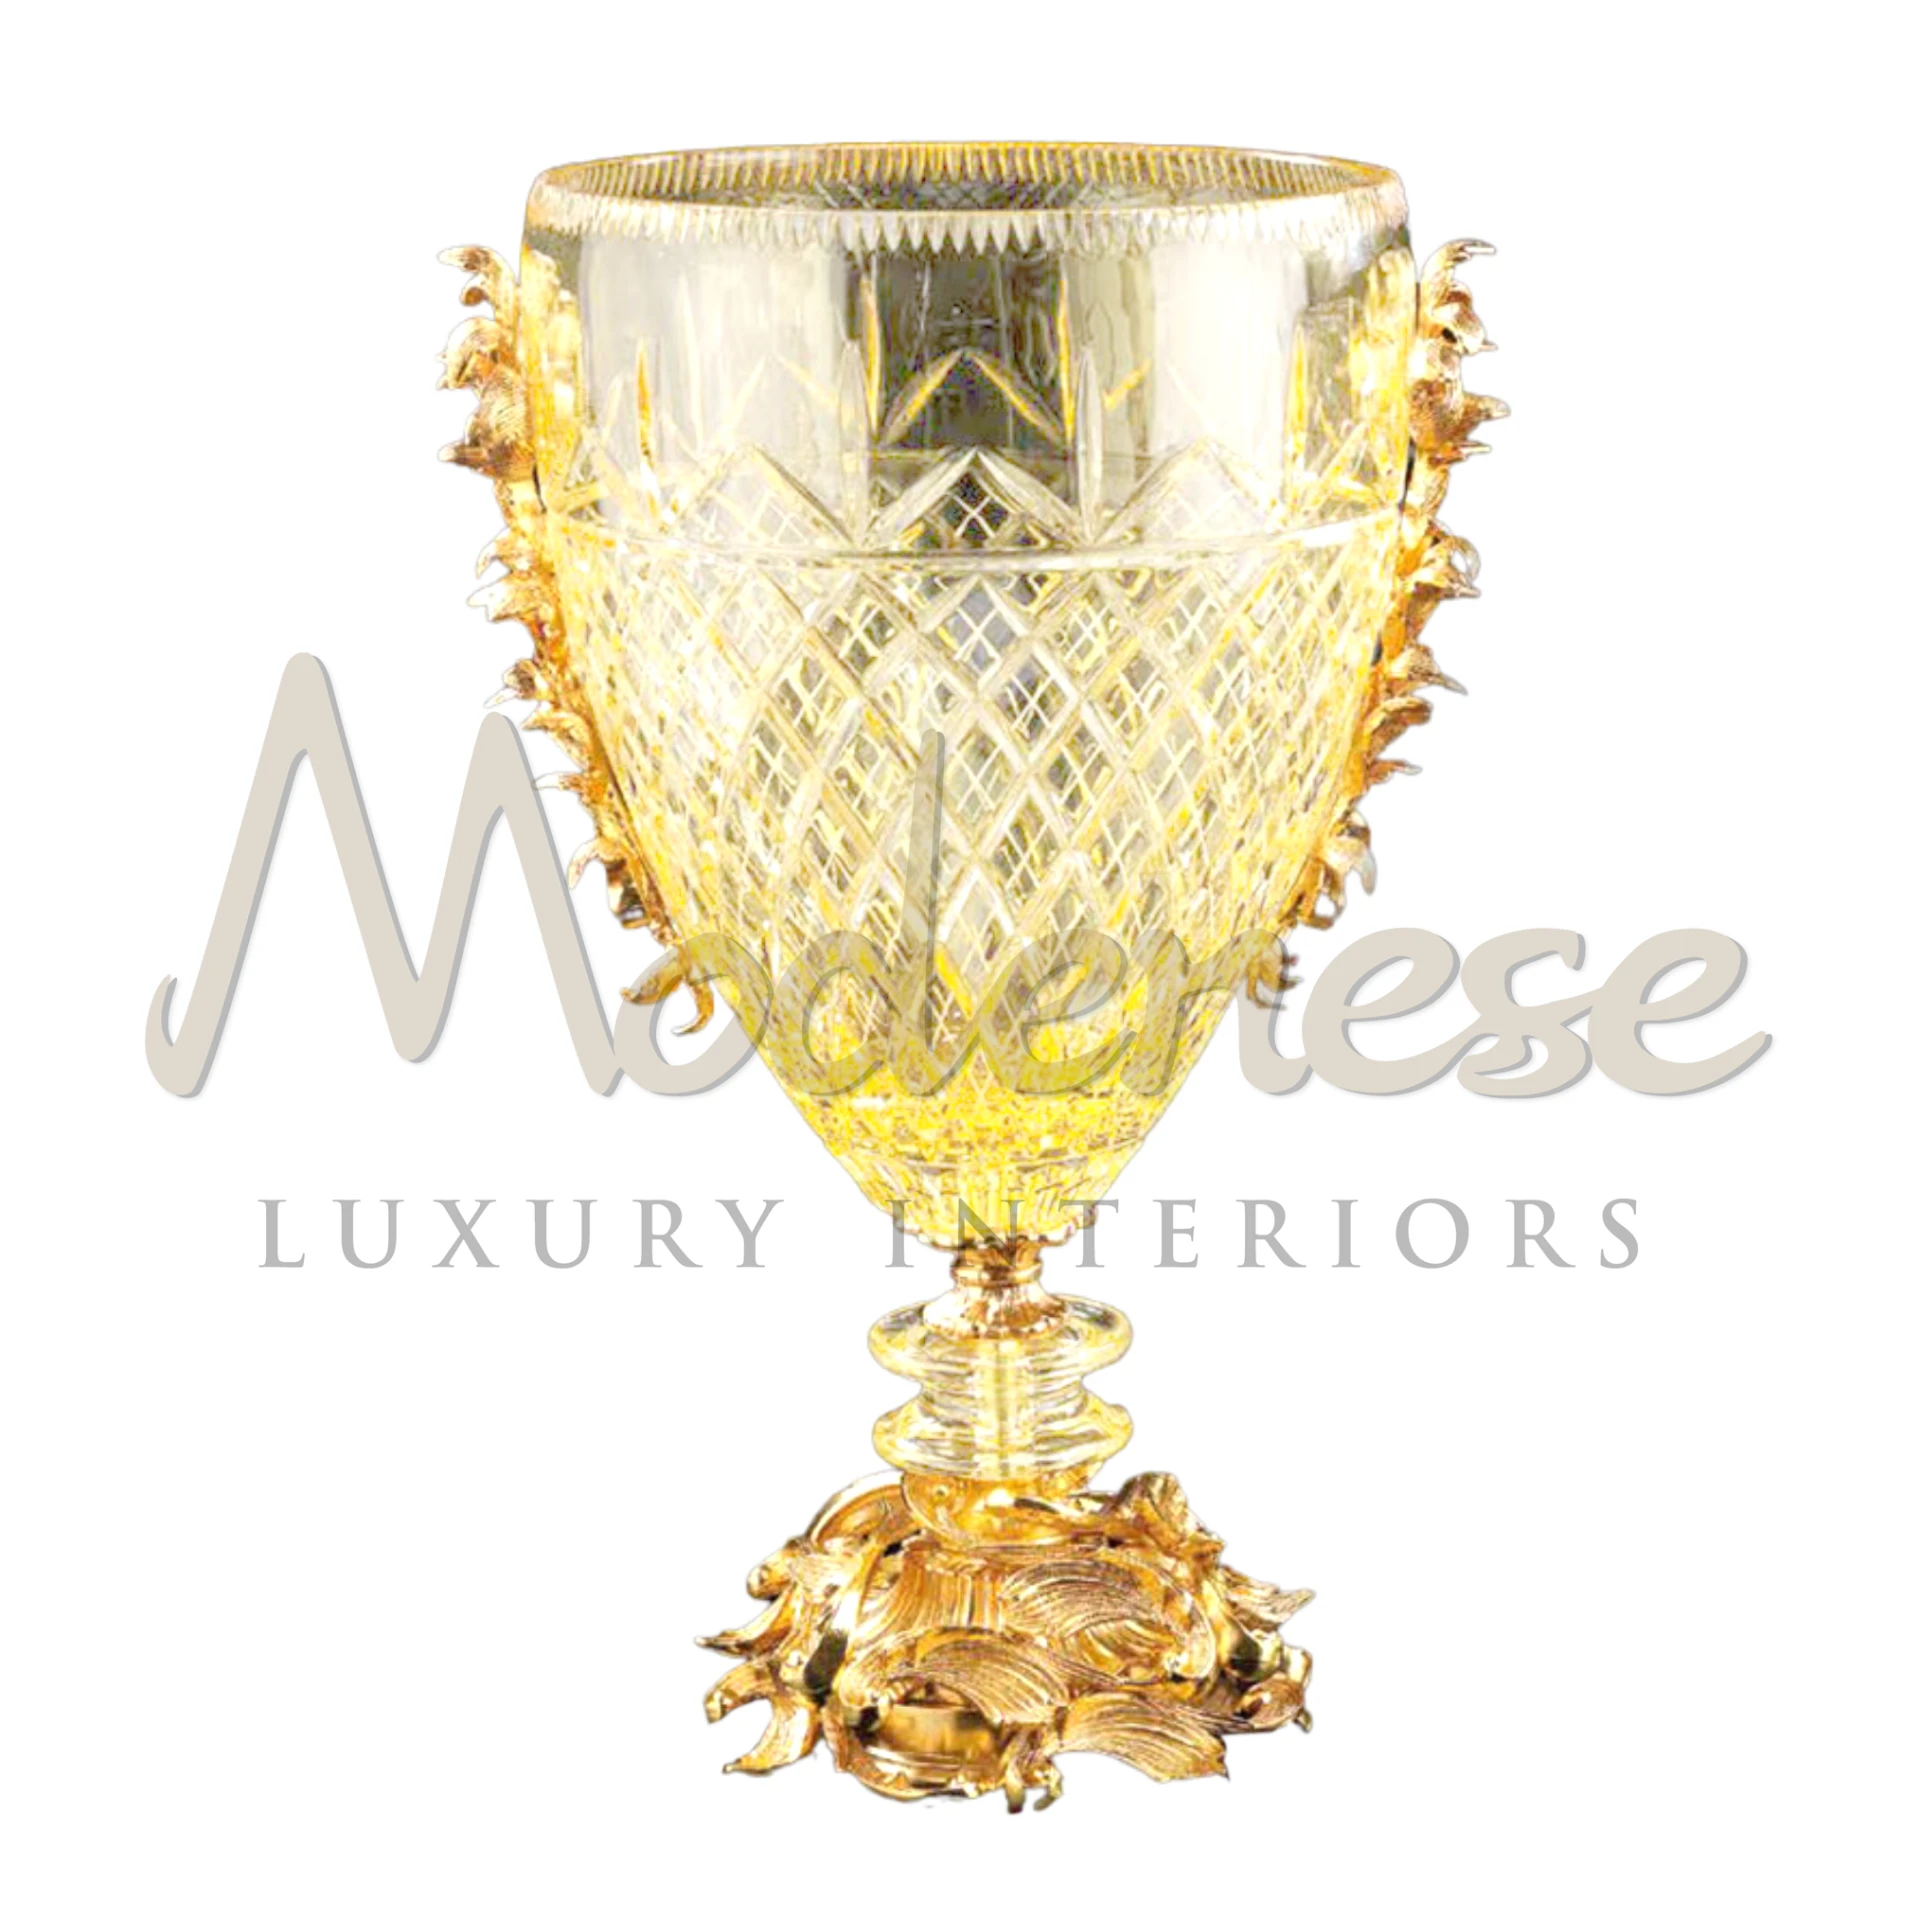 Gorgeous Light Yellow Glass Vase, perfect for adding warmth and brightness, complements various decor styles in luxury interior designs.